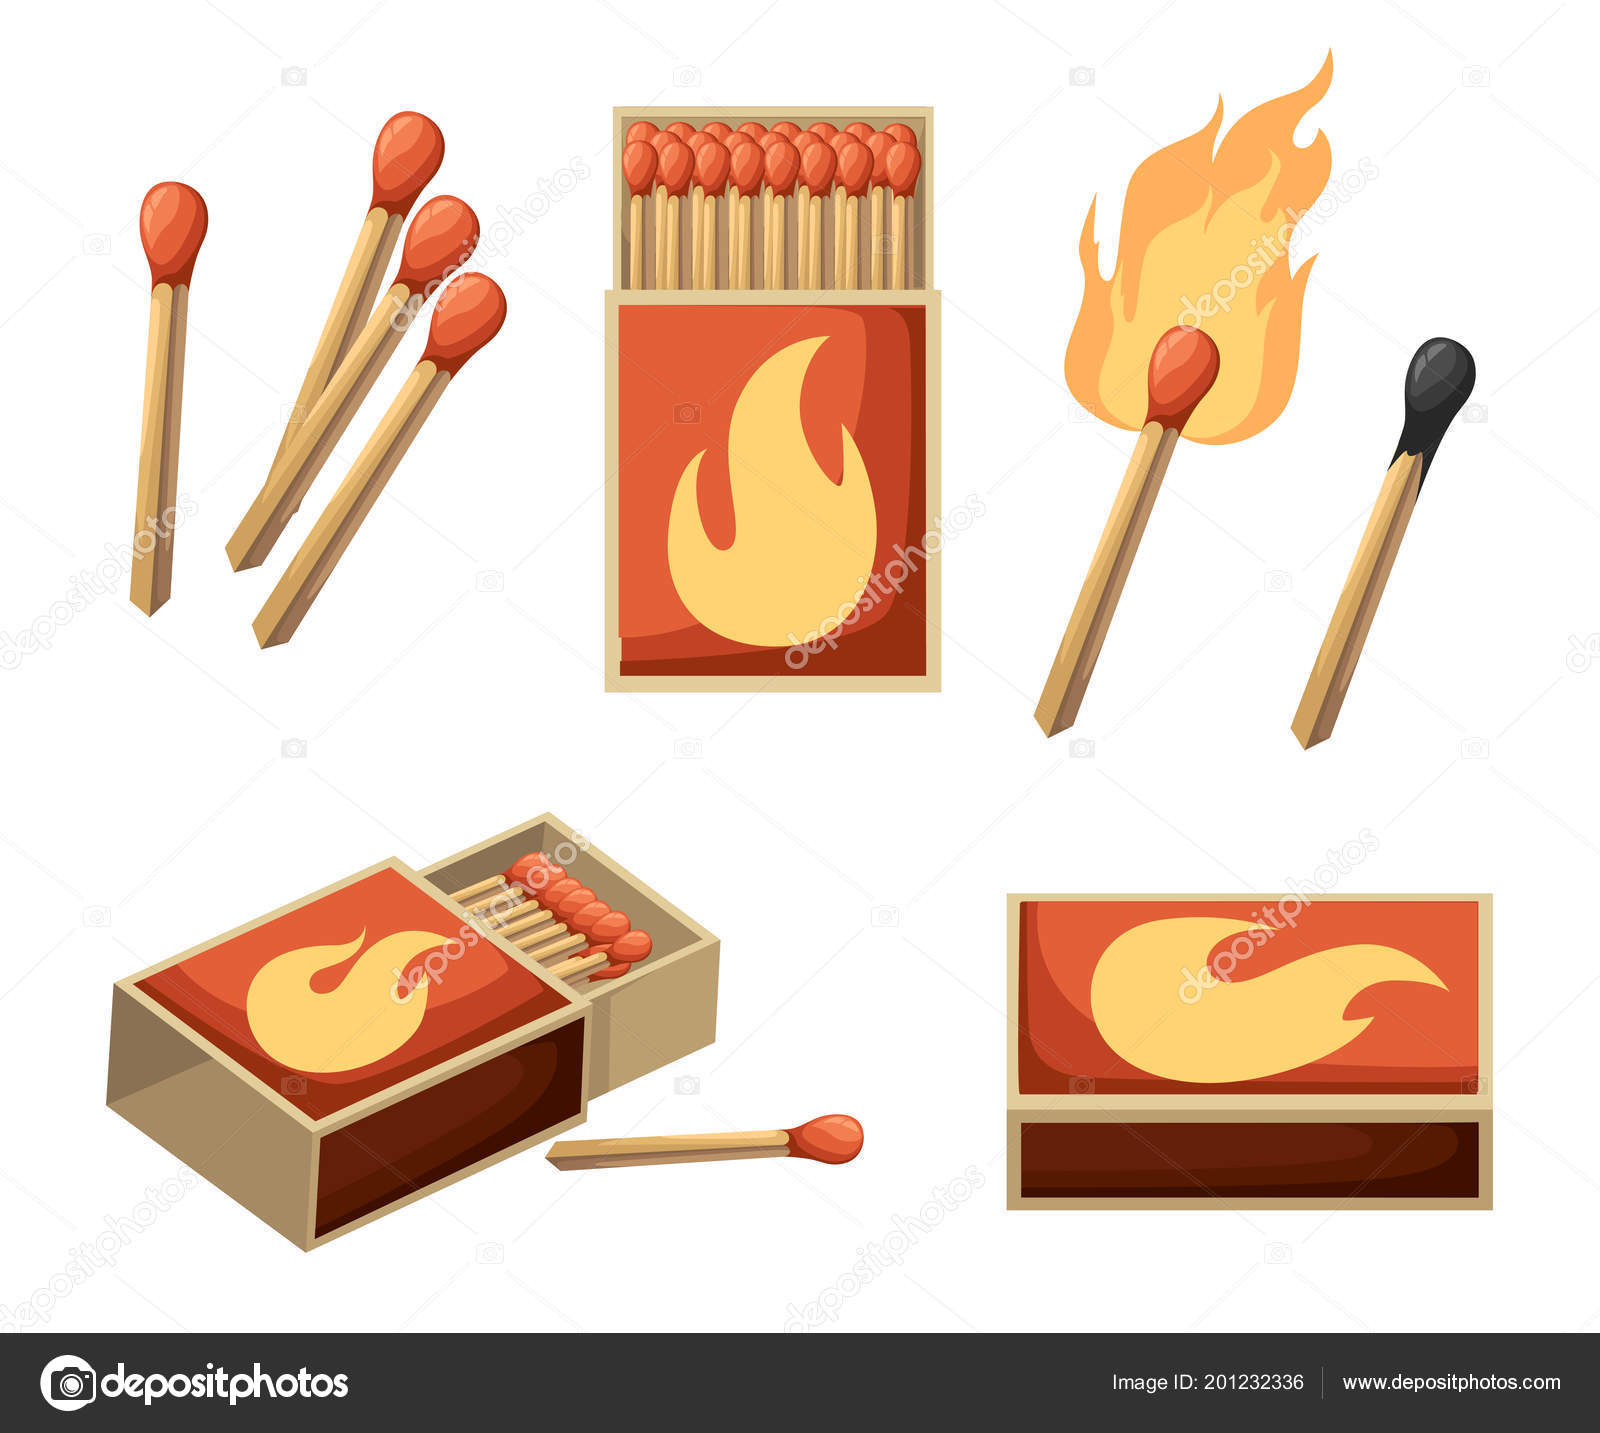 Match Stick Clipart Transparent Background, Wooden Match Stick  Illustration, Wooden Matchstick, Illustration, Flame PNG Image For Free  Download